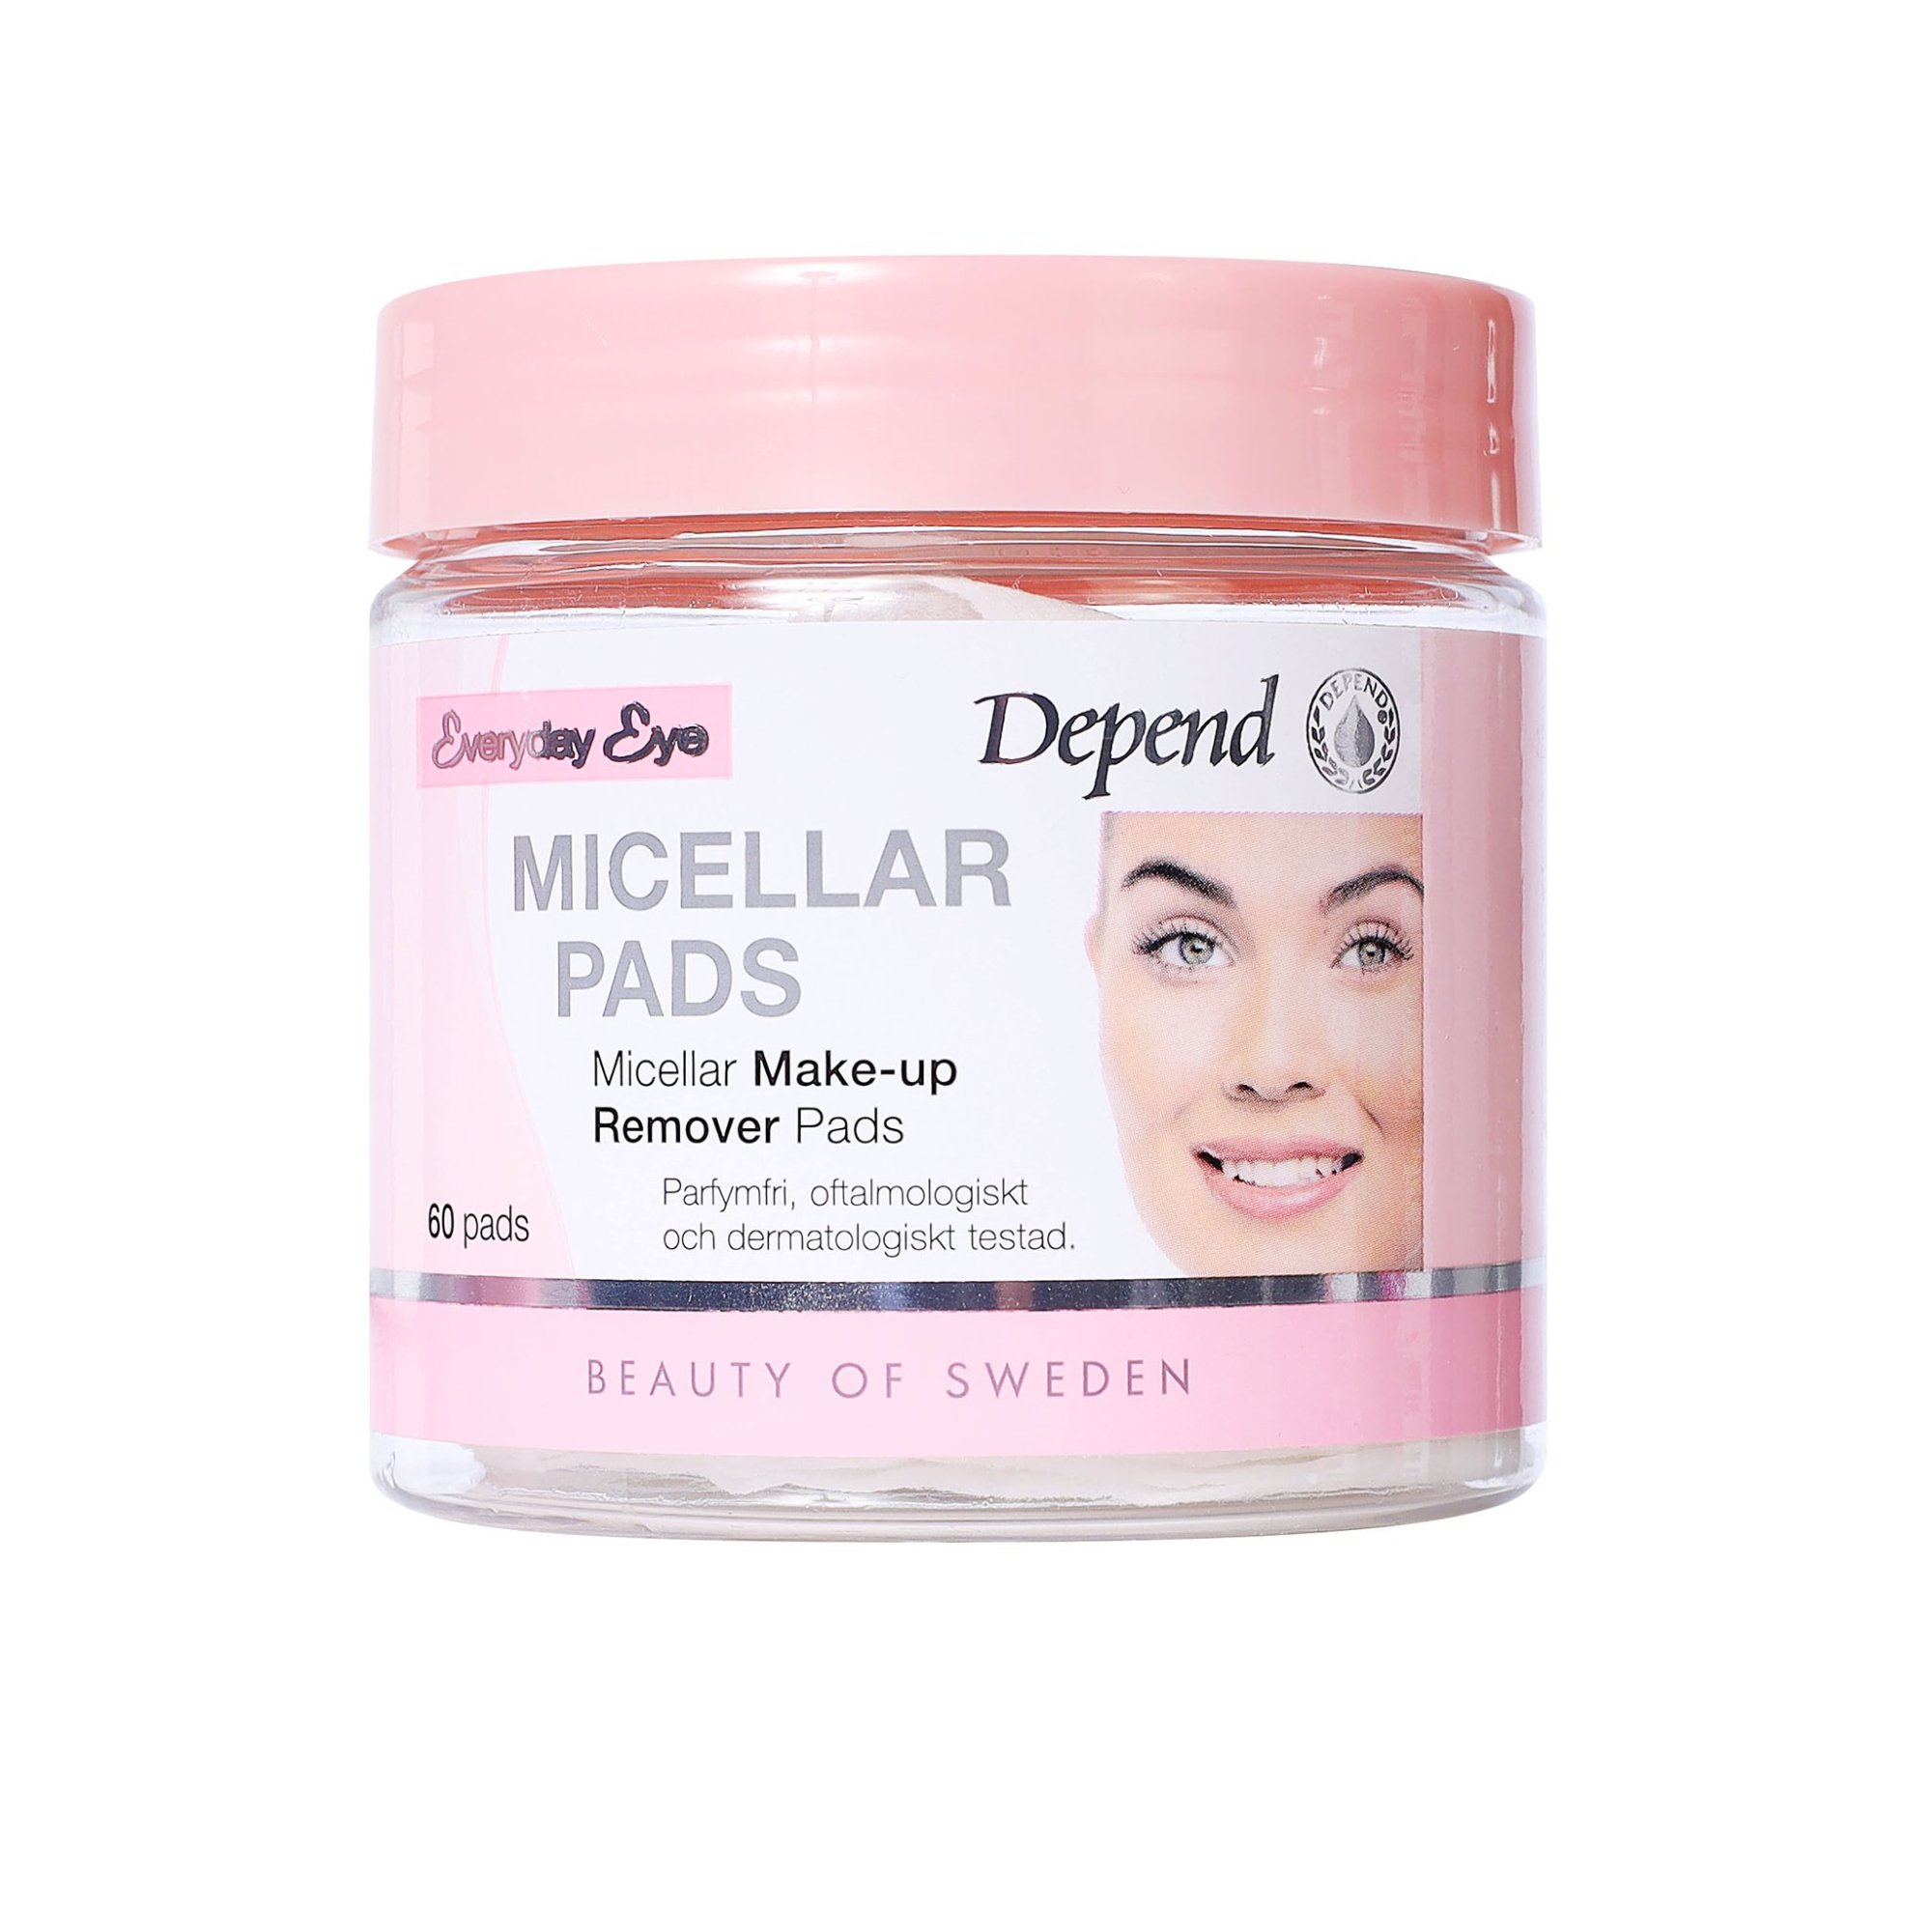 Everyday Eye Micellar Pads Depend Cosmetic Oy